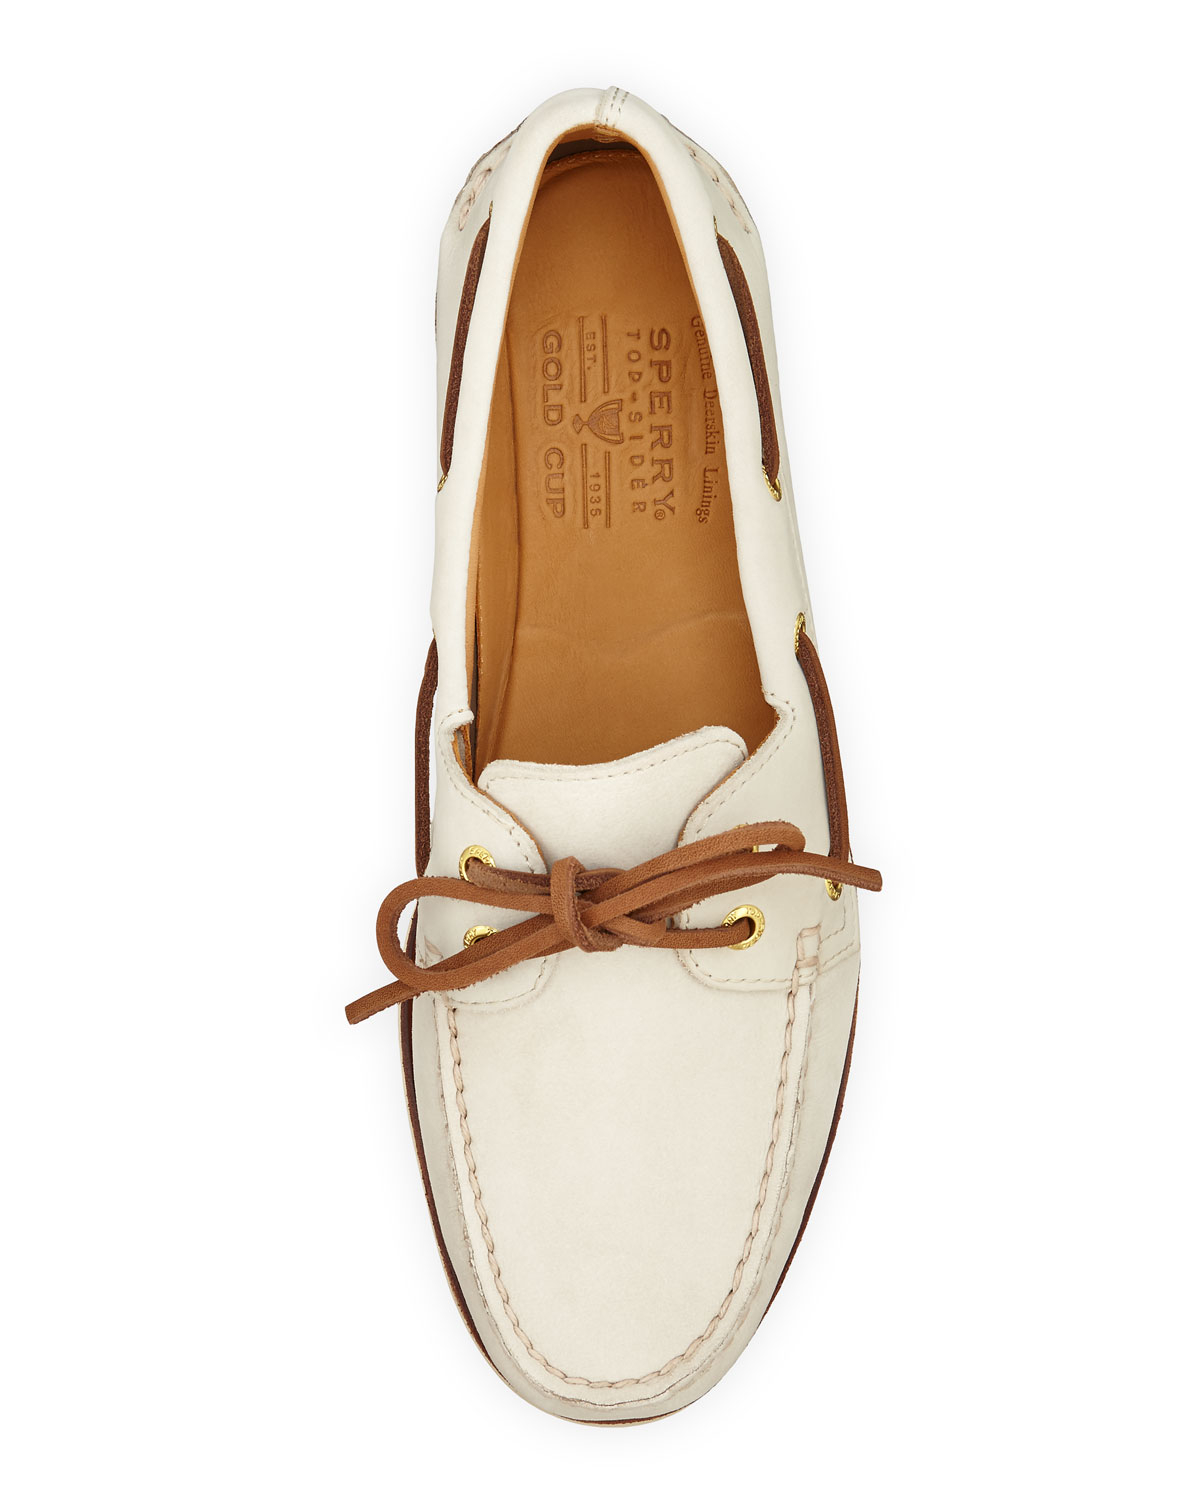 Sperry top-sider Gold Cup Authentic Original Boat Shoe in ...